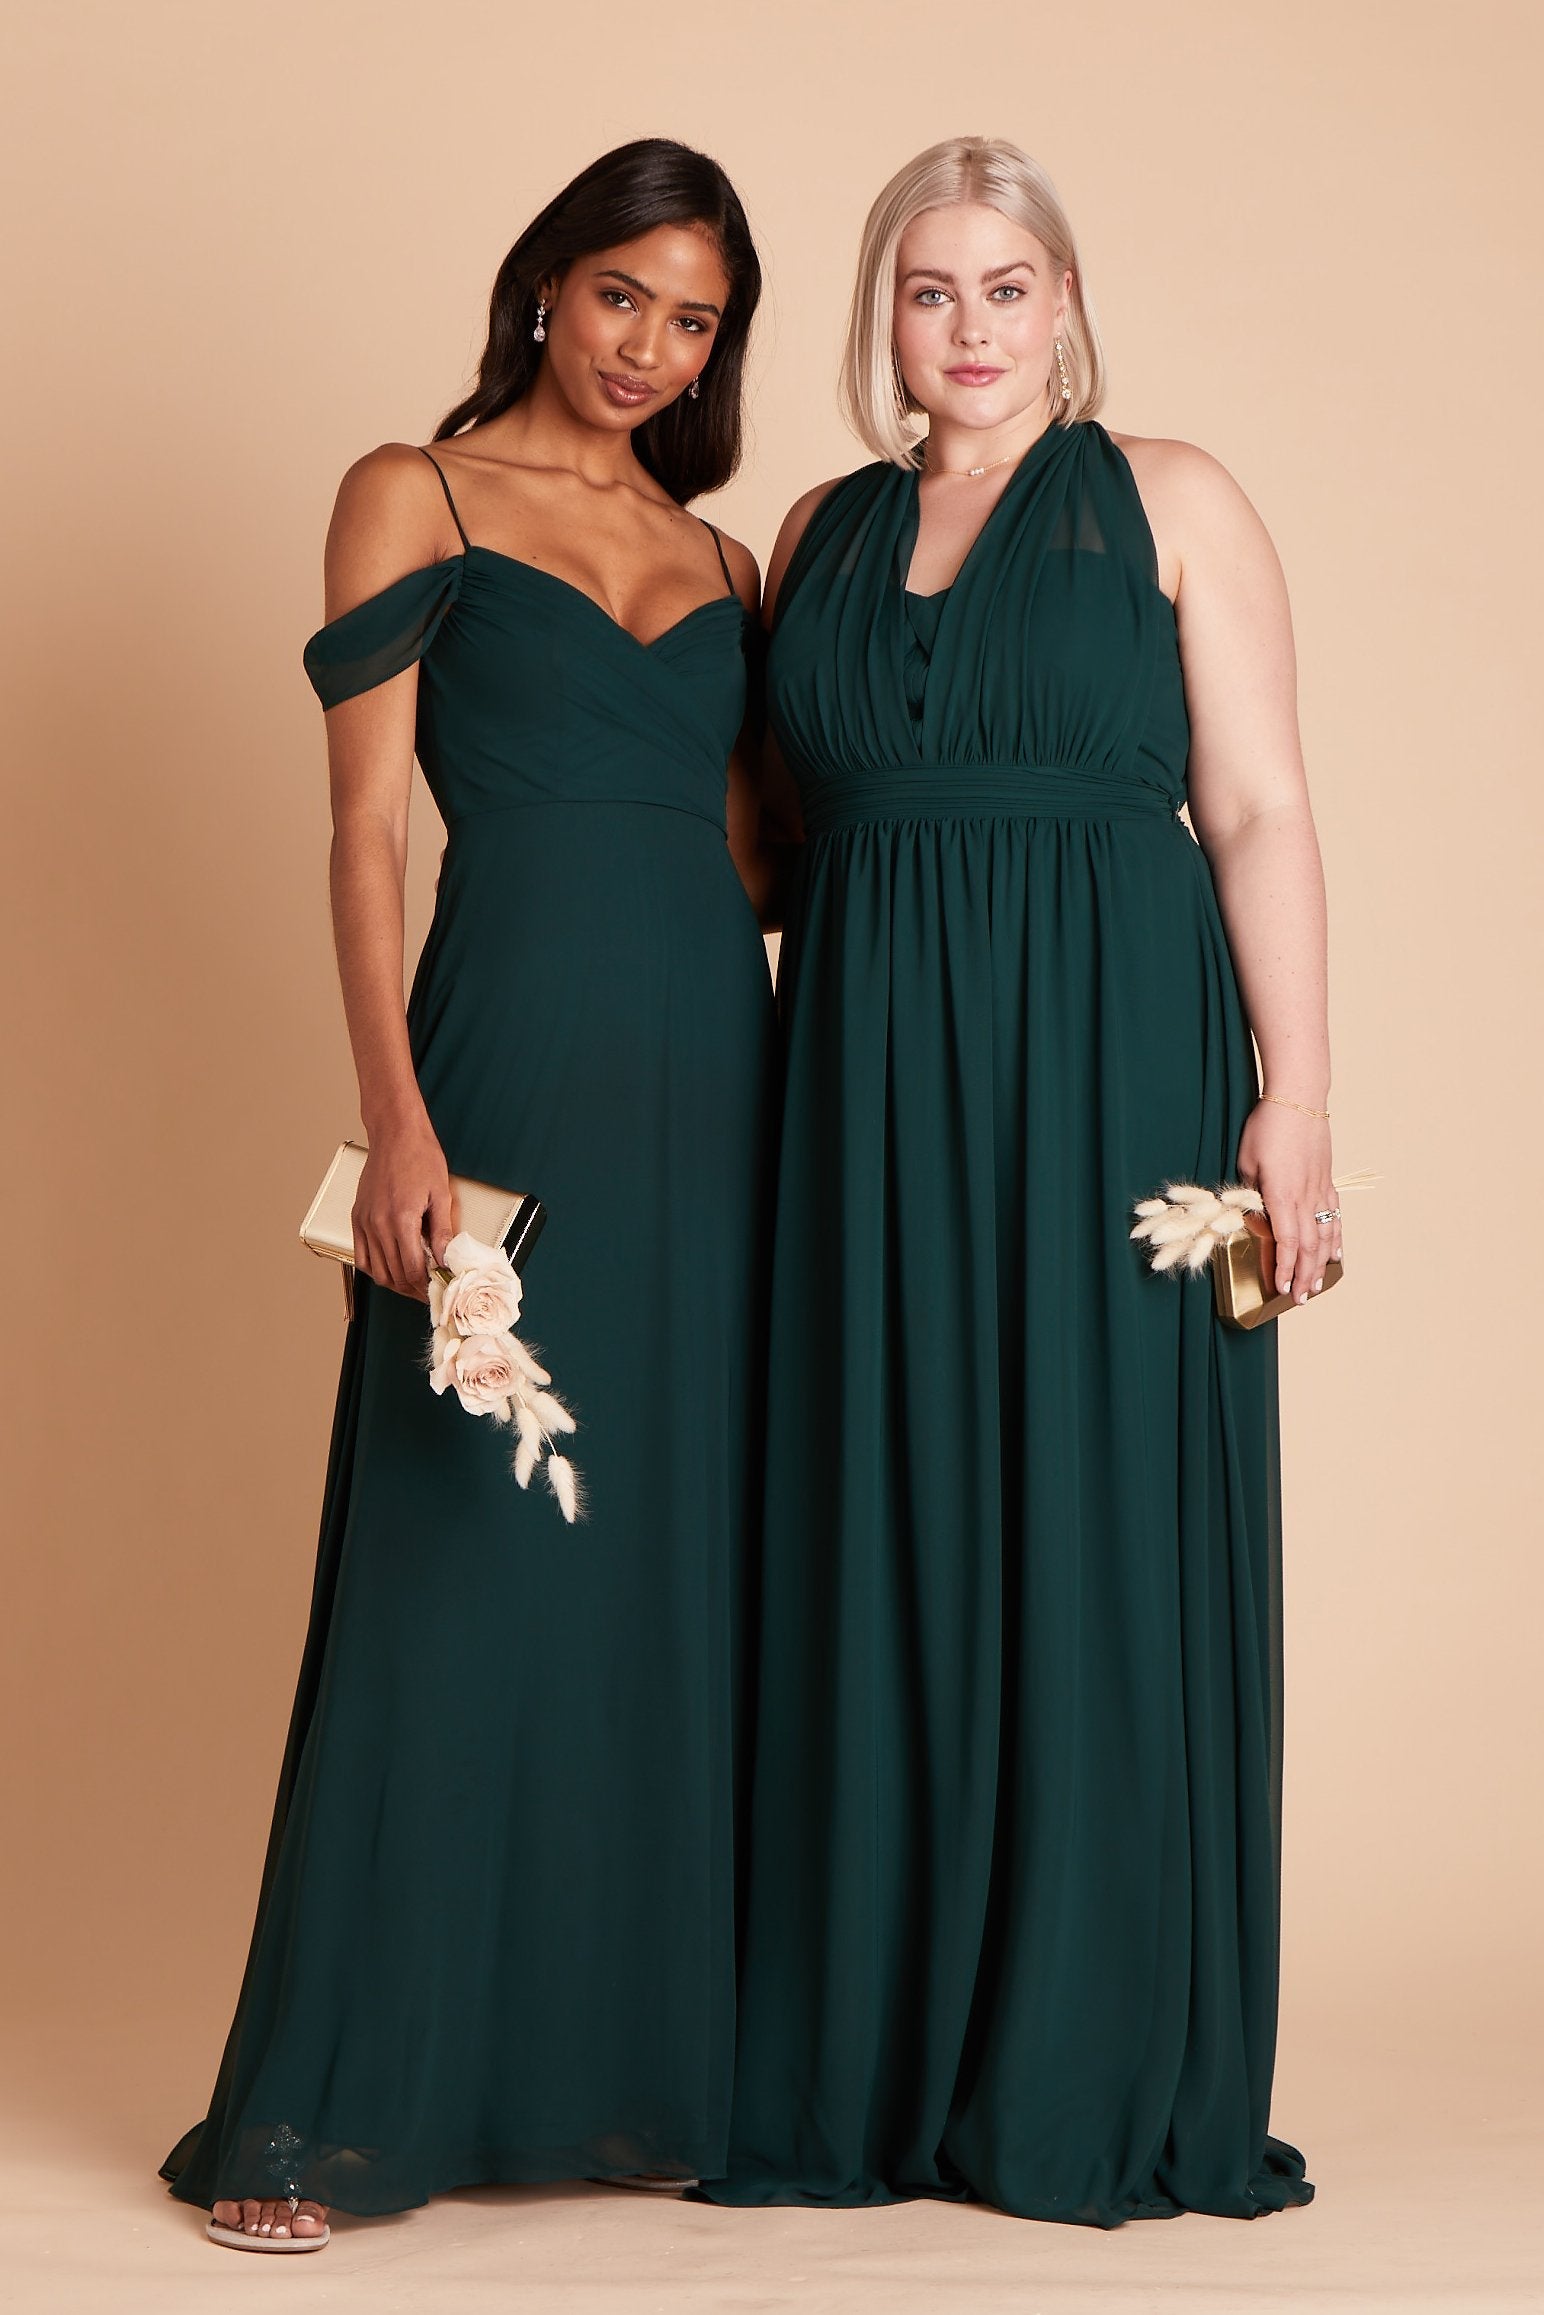 Front view of two models wearing emerald chiffon dresses. The model on the left wears the Devin Convertible Dress by Birdy Grey with spaghetti straps and off-the-shoulder sleeves. The model on the right wears the Grace Convertible Plus Size Bridesmaid Dress with the front streamers tied back behind the neck, giving a plunge halter appearance over the sweetheart top. 